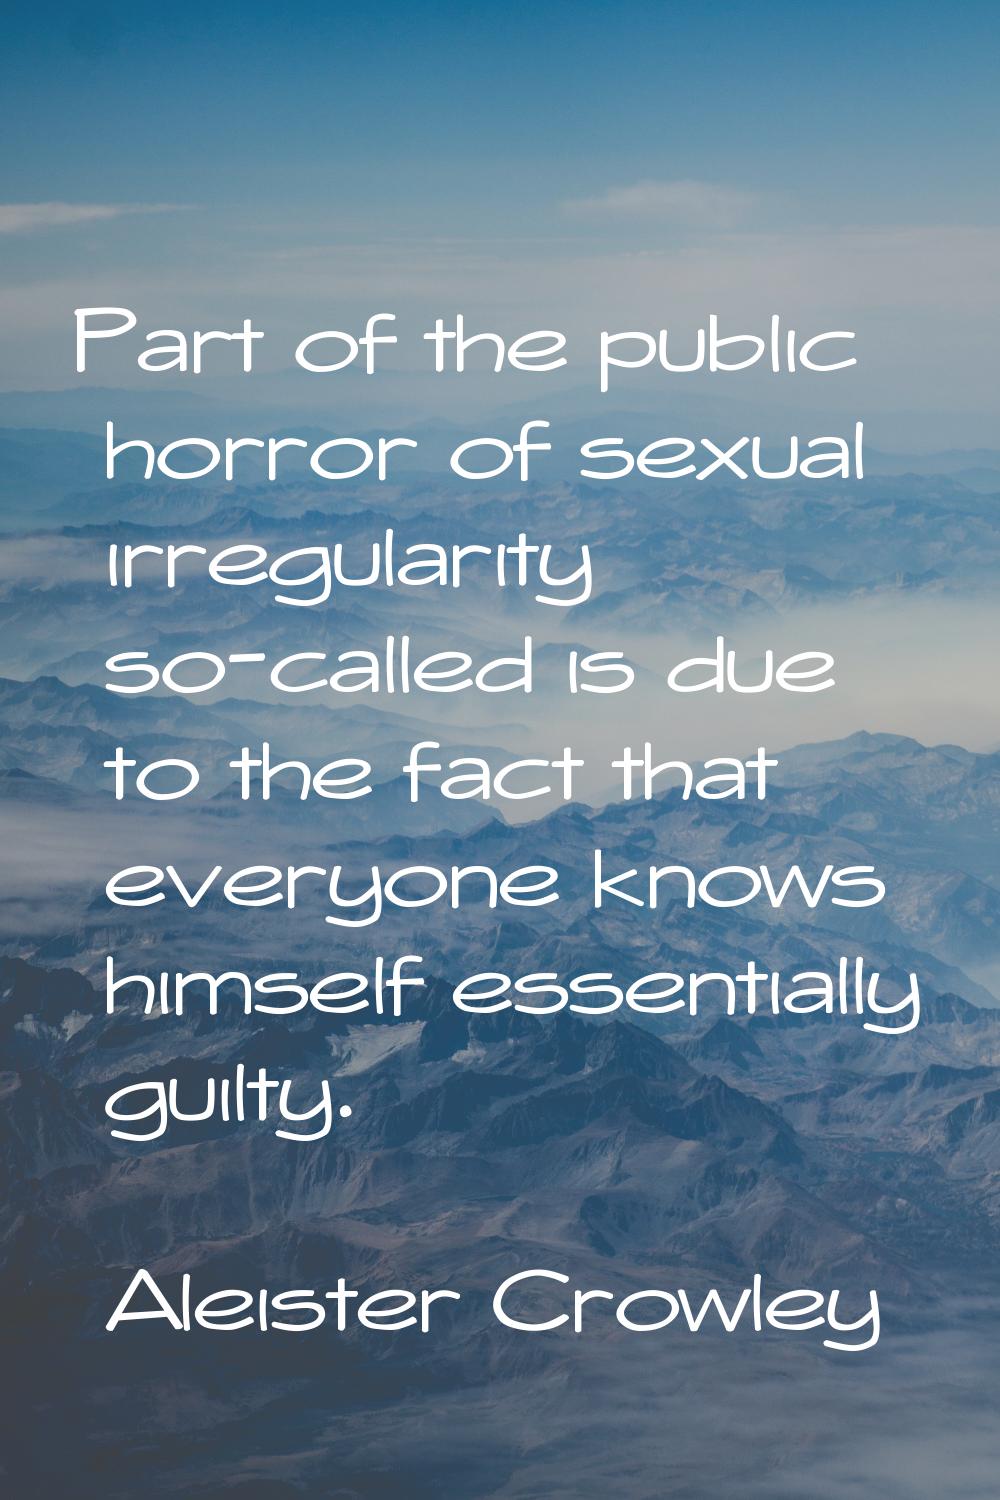 Part of the public horror of sexual irregularity so-called is due to the fact that everyone knows h